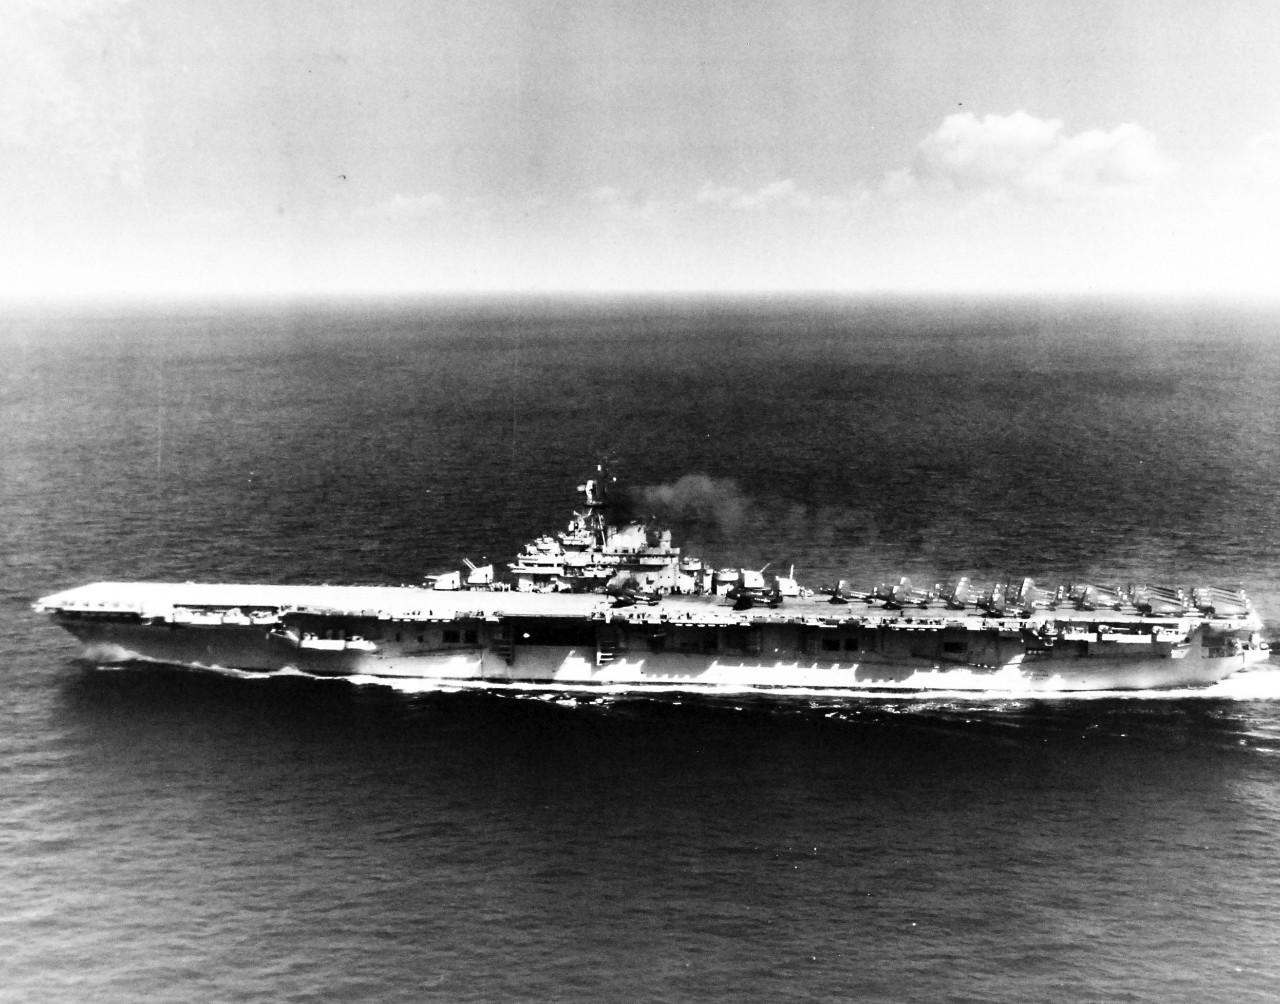 80-G-405966: USS Leyte (CV-32), January 1949.   Underway.    Official U.S. Navy photograph, now in the collections of the National Archives.  (2017/02/07).